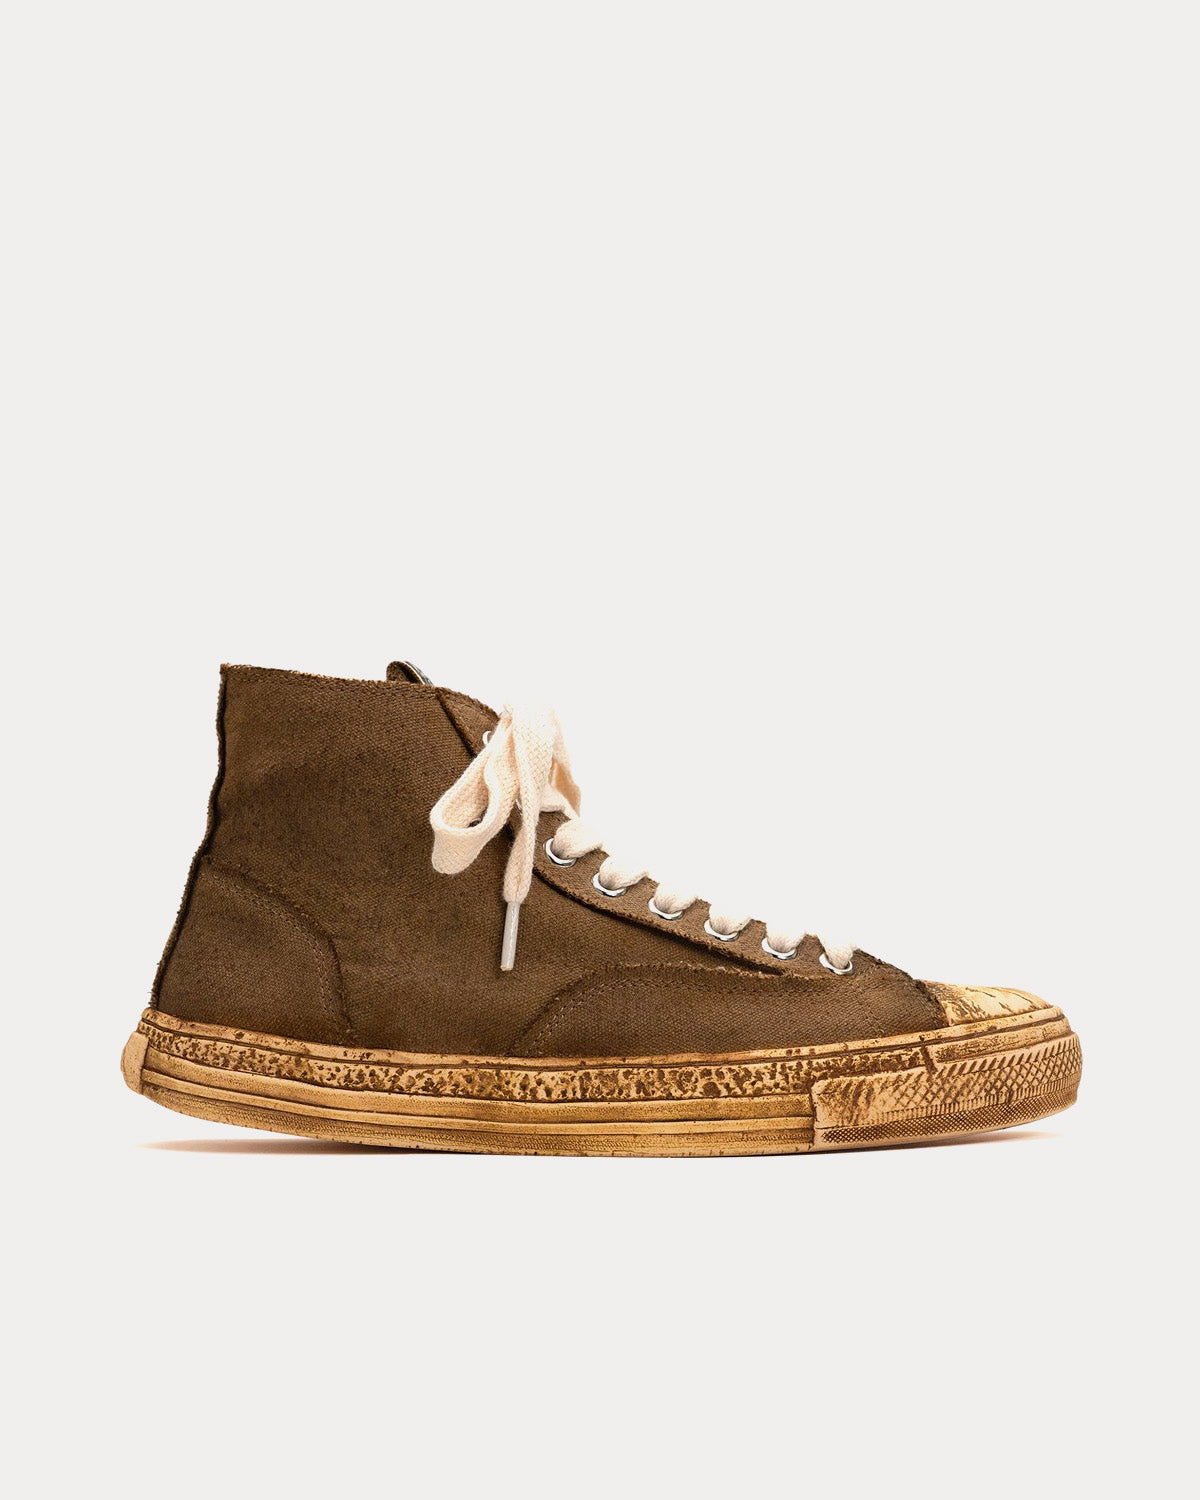 General Scale By Maison Mihara Yasuhiro - Past Sole Overdyed Canvas Brown High Top Sneakers